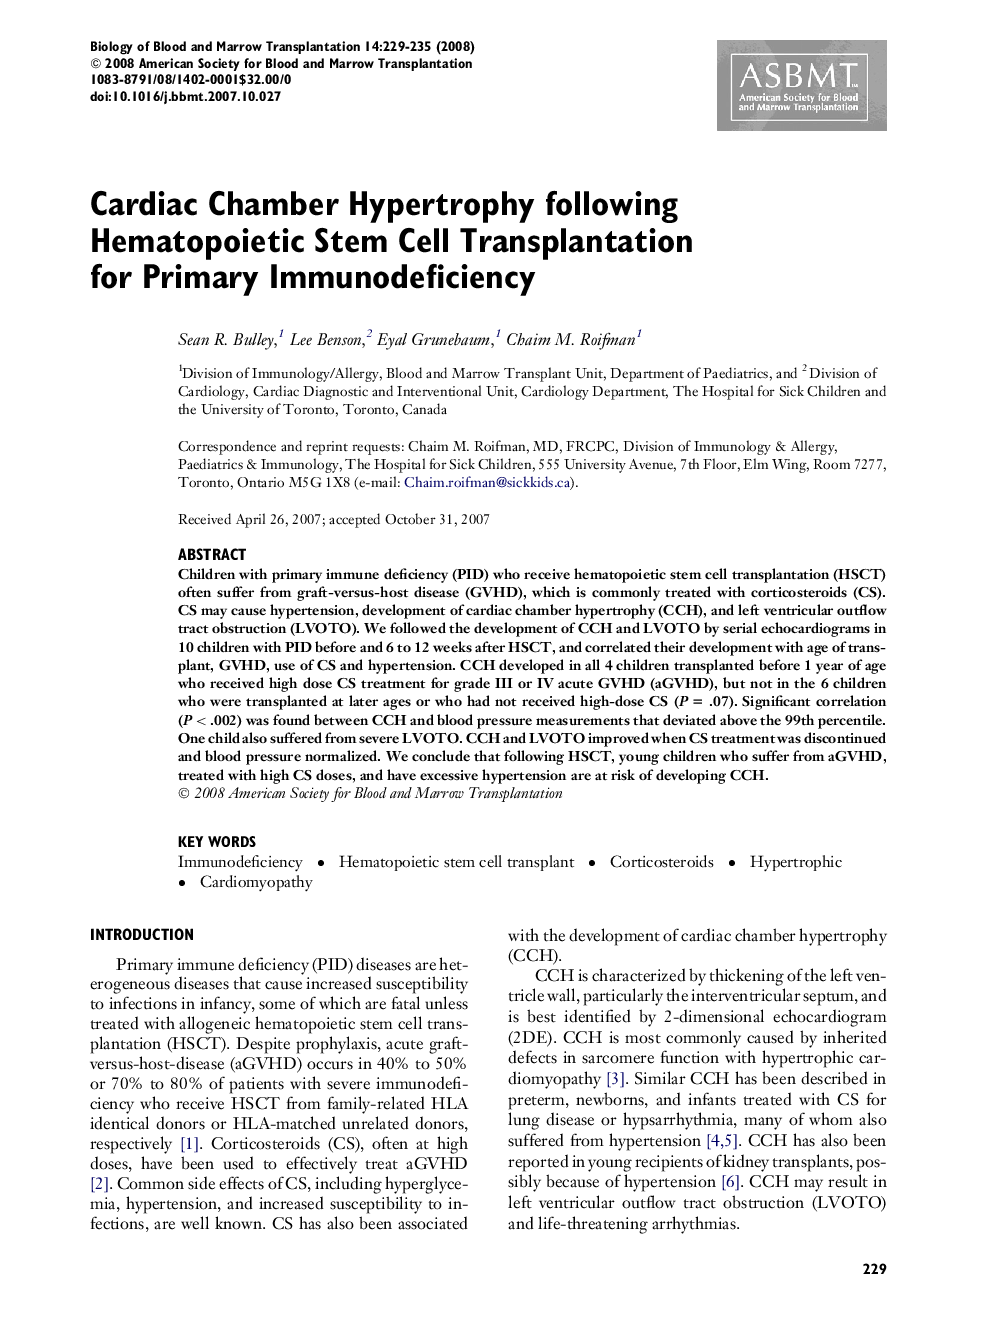 Cardiac Chamber Hypertrophy following Hematopoietic Stem Cell Transplantation for Primary Immunodeficiency